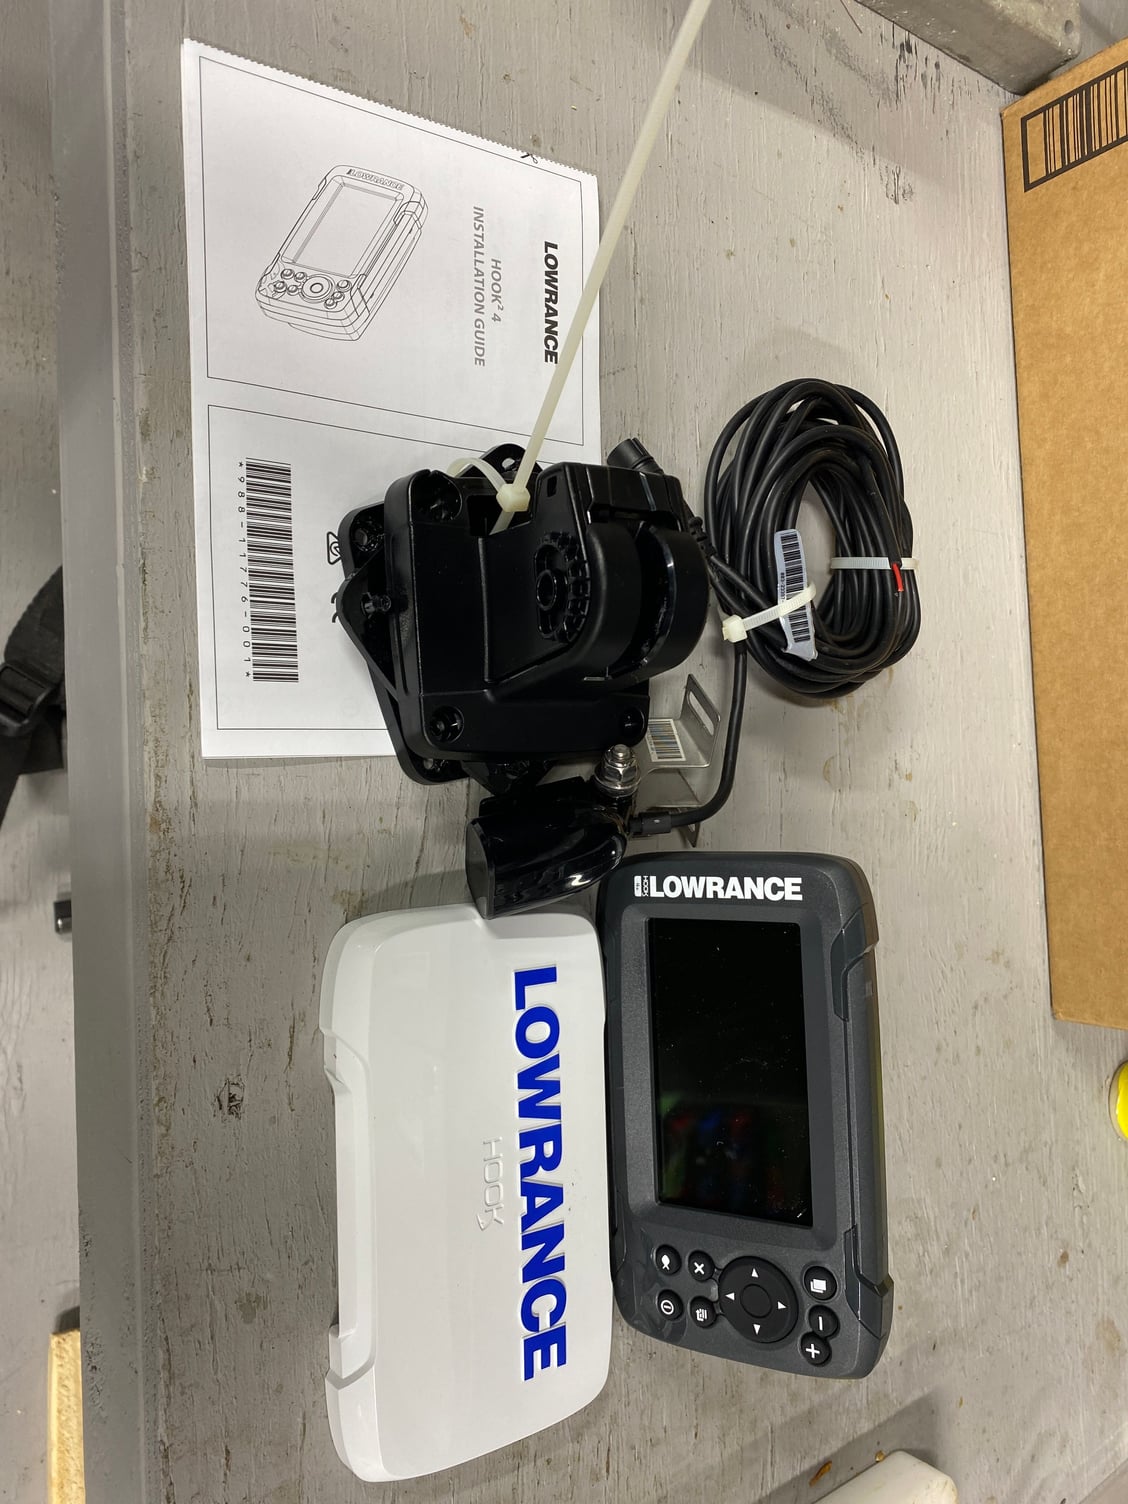 Lowrance Hook 2 Fish Finder for sale - The Hull Truth - Boating and Fishing  Forum